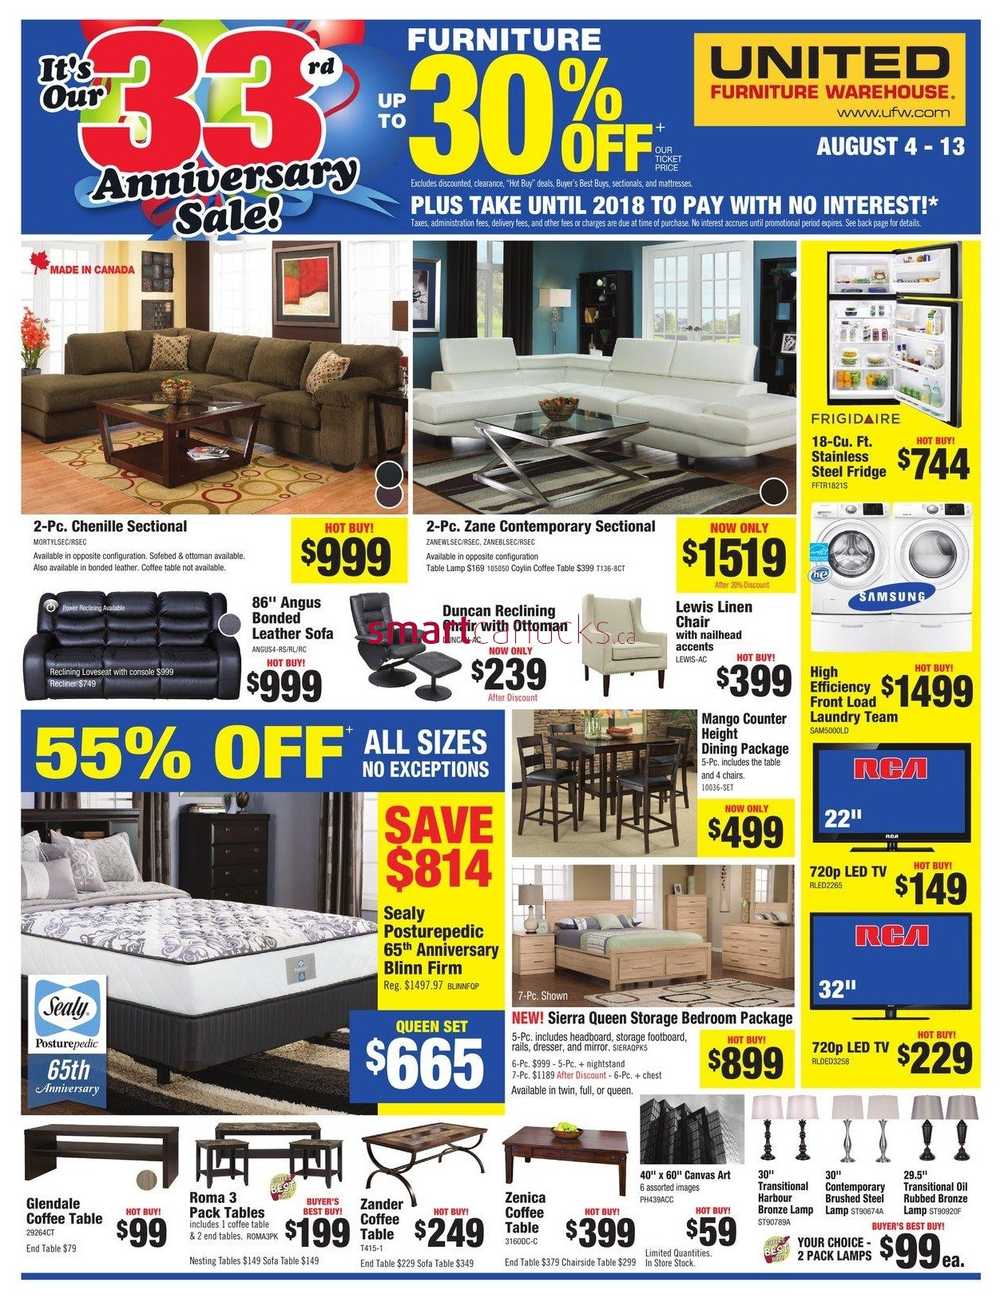 New United Furniture Warehouse Kitchener for Simple Design